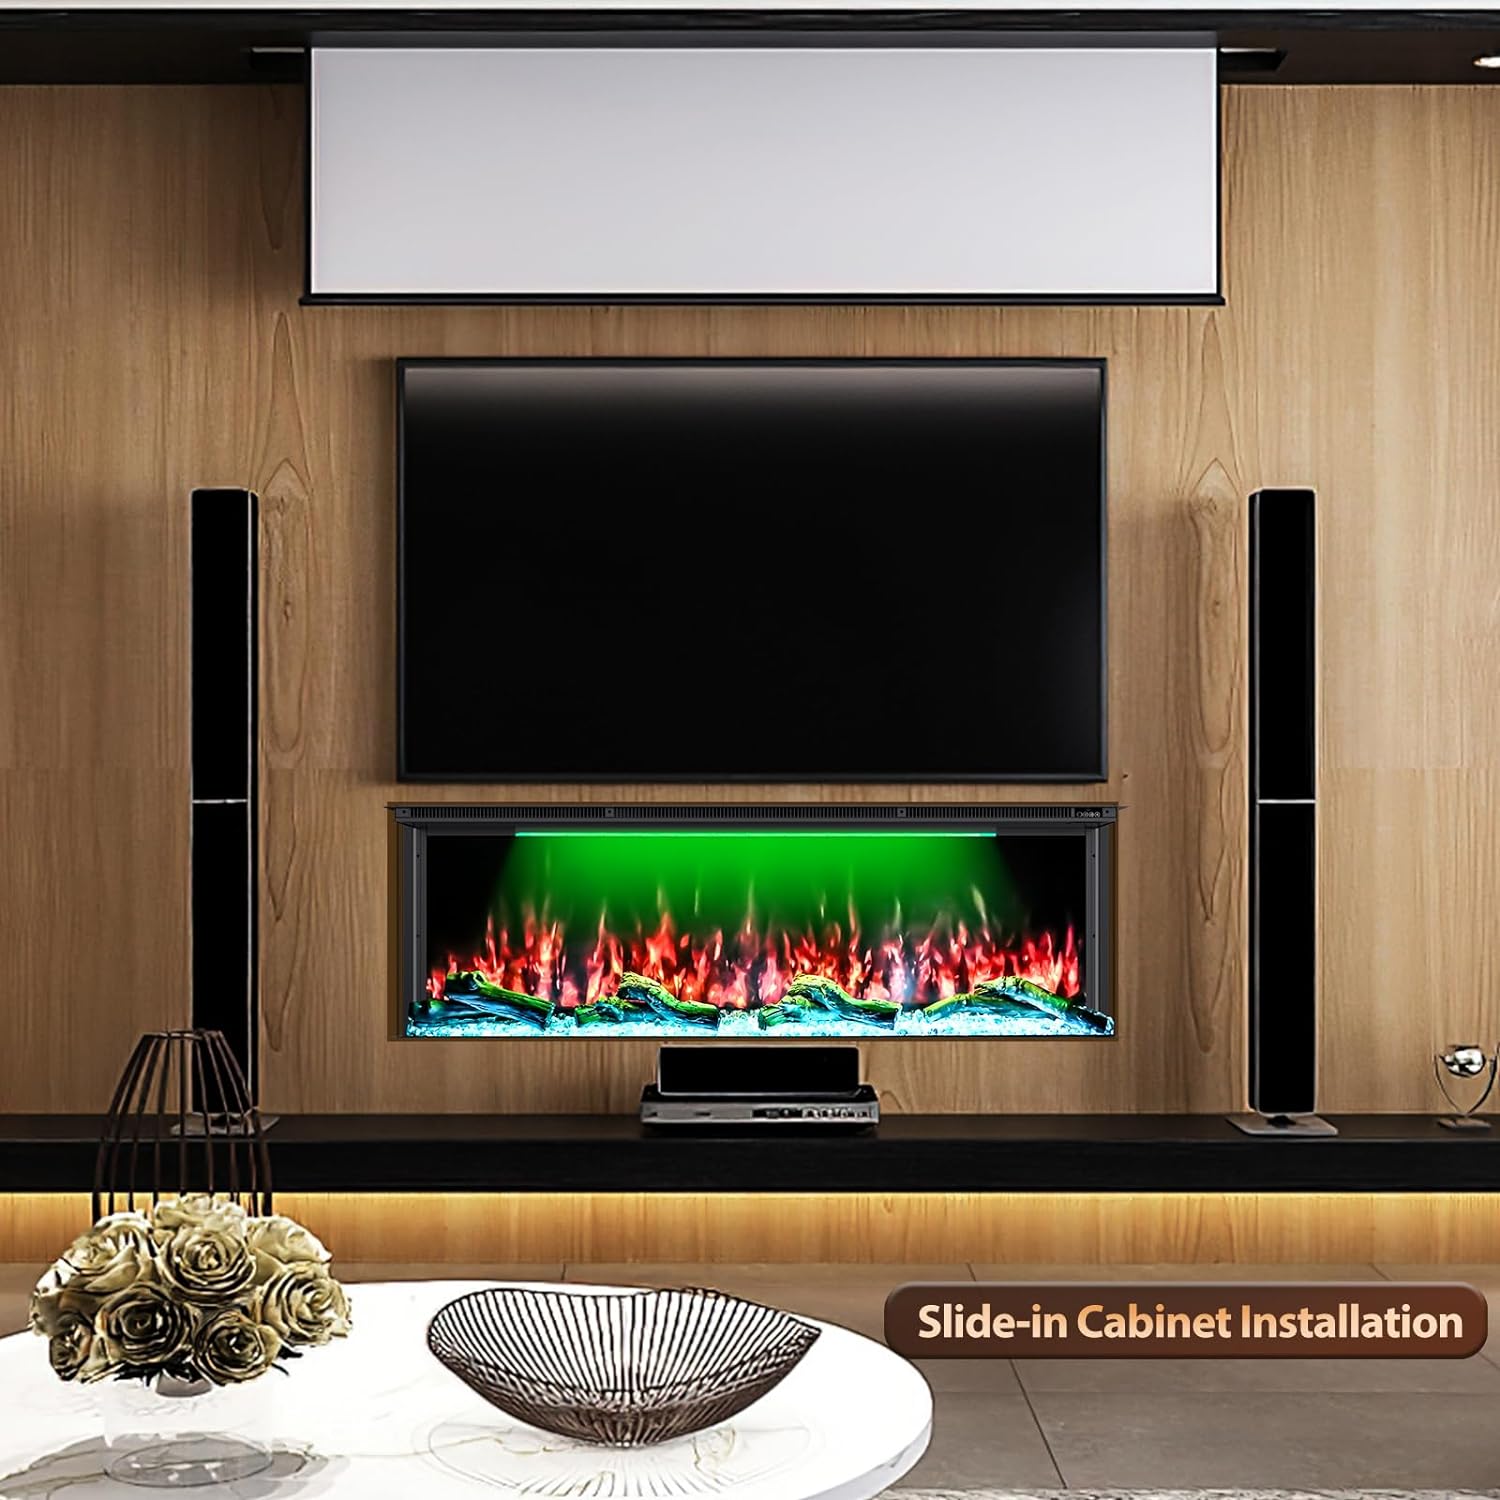 Recessed 3-Sided Electric Fireplace, 80-inch Smart WiFi 251 Flame Colors Combination Inserts Eletric Fire Place Heater for Living Room Indoor Use with Remote Control, Log & Crystals, Black